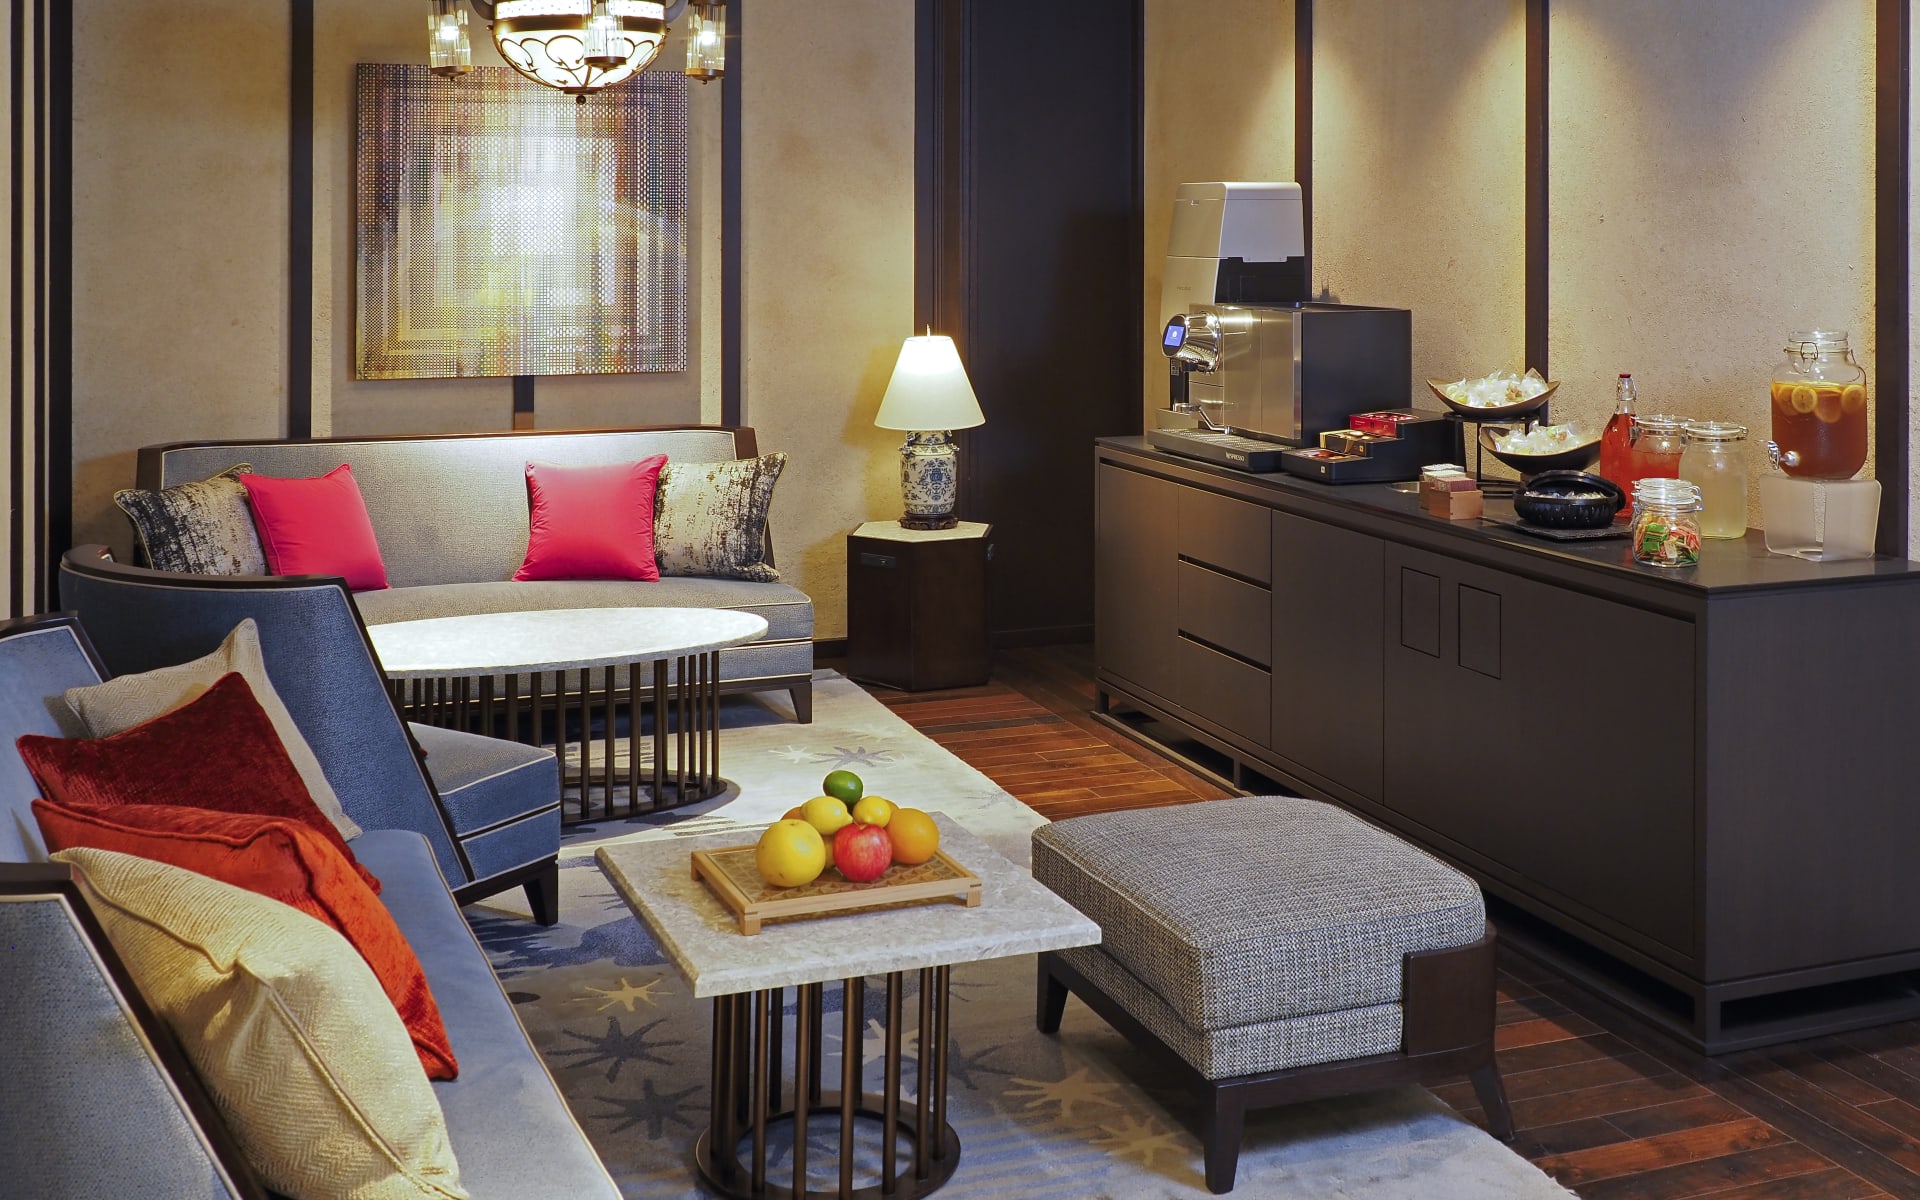 The lobby at Dhawa Yura has sofas with vibrant pillows, complementary fruit and a drinks/coffee station. 